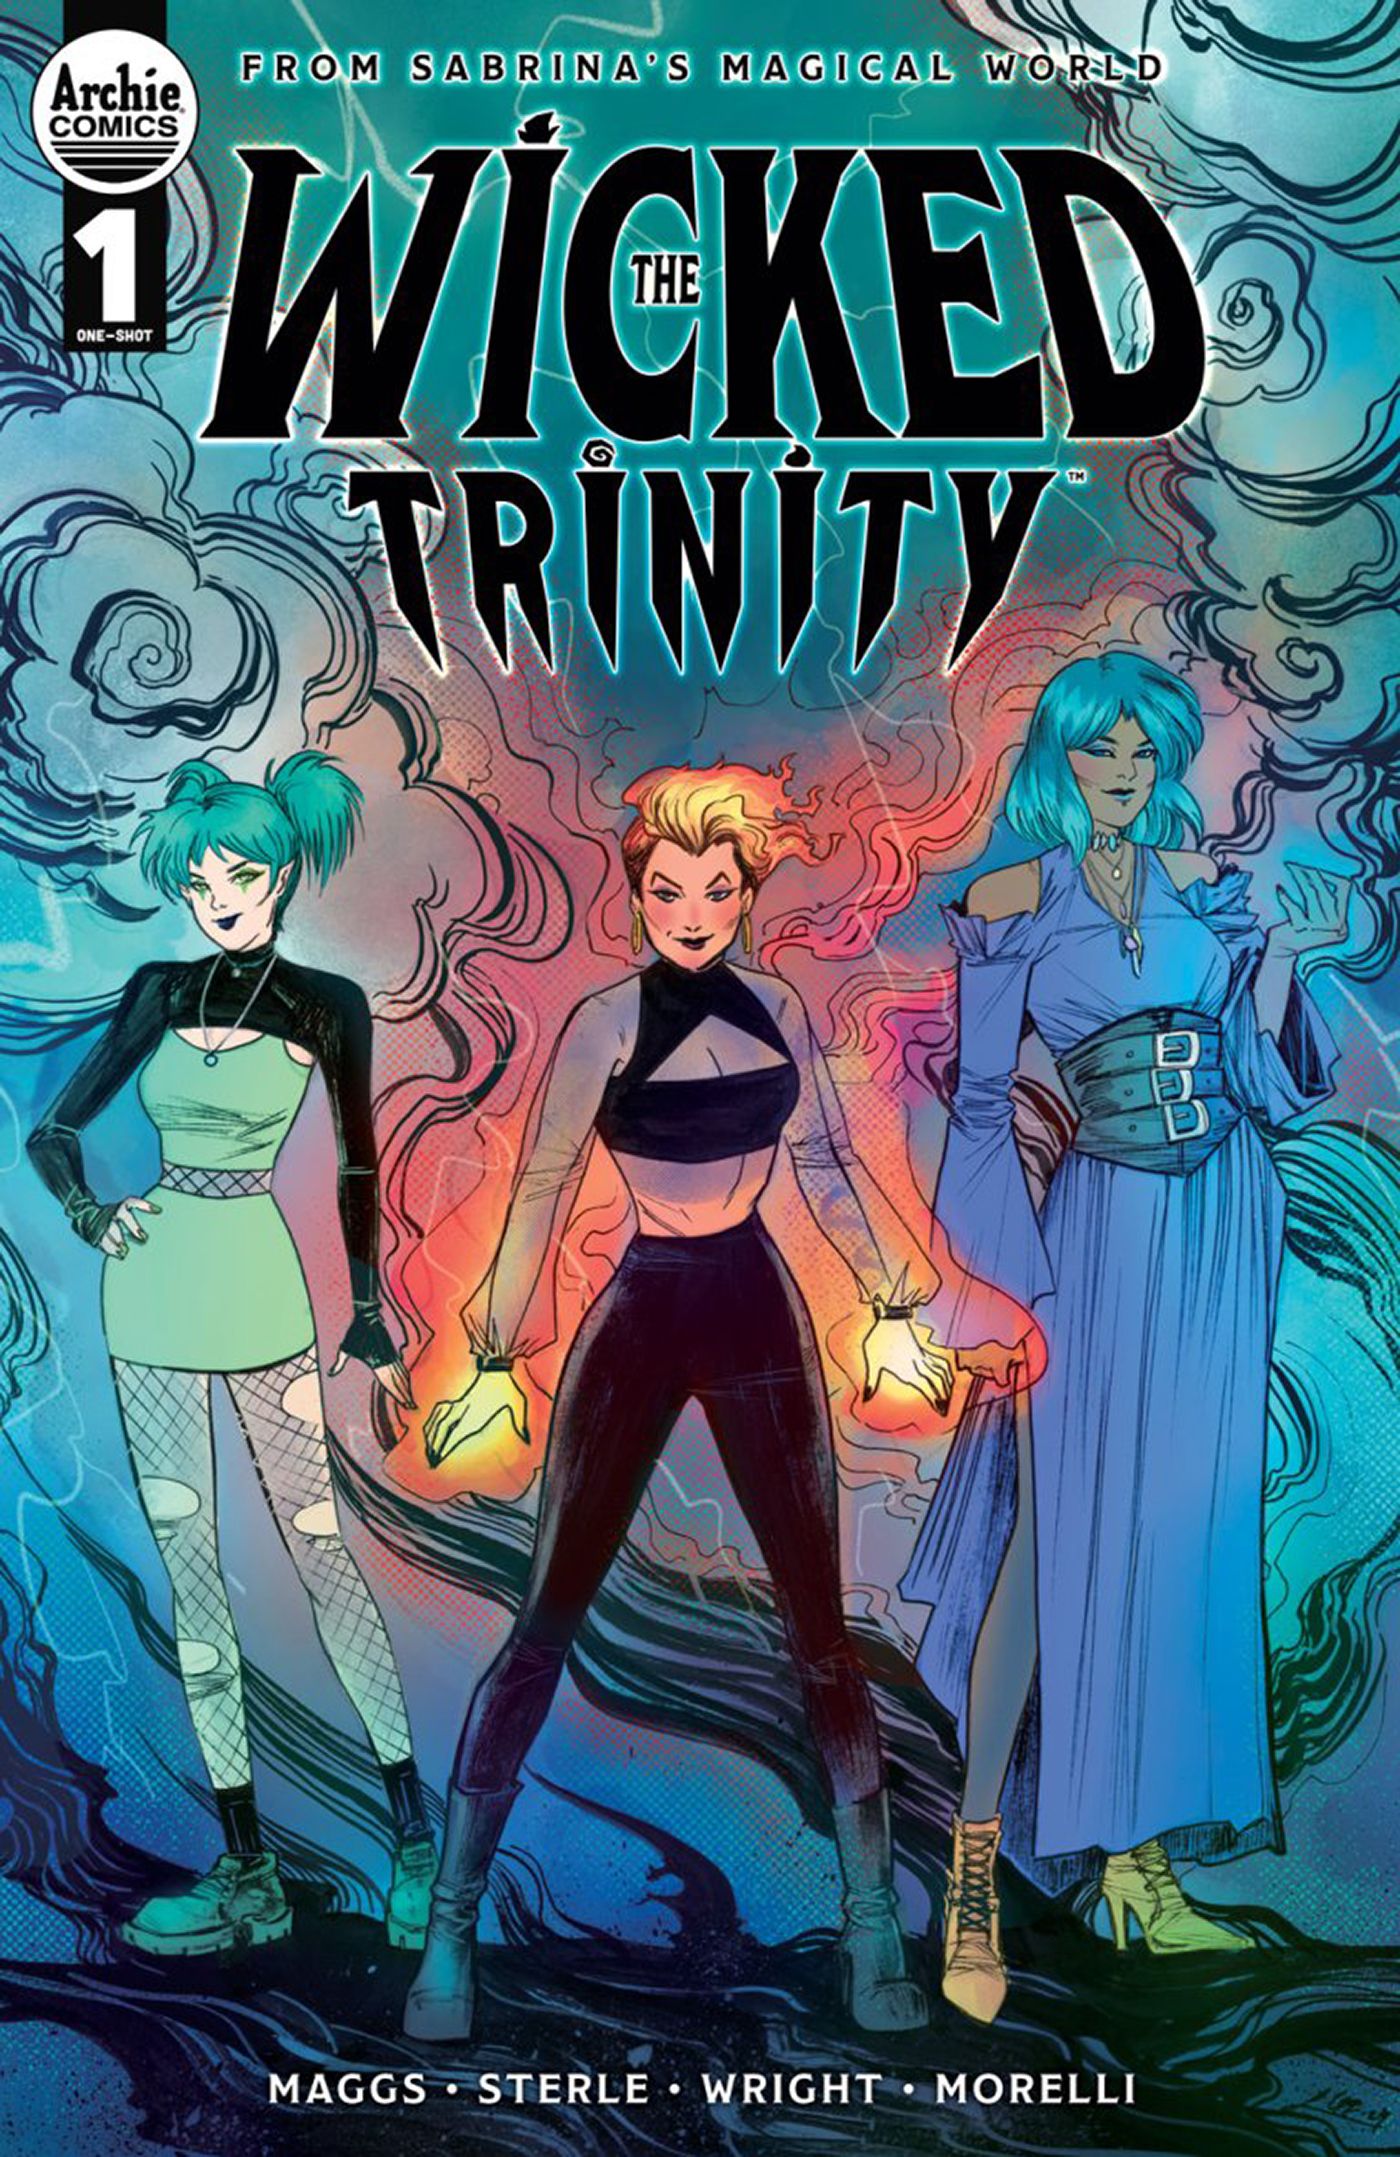 The Wicked Trinity variant cover by Soo Lee featuring Jade, Amber, and Sapphire